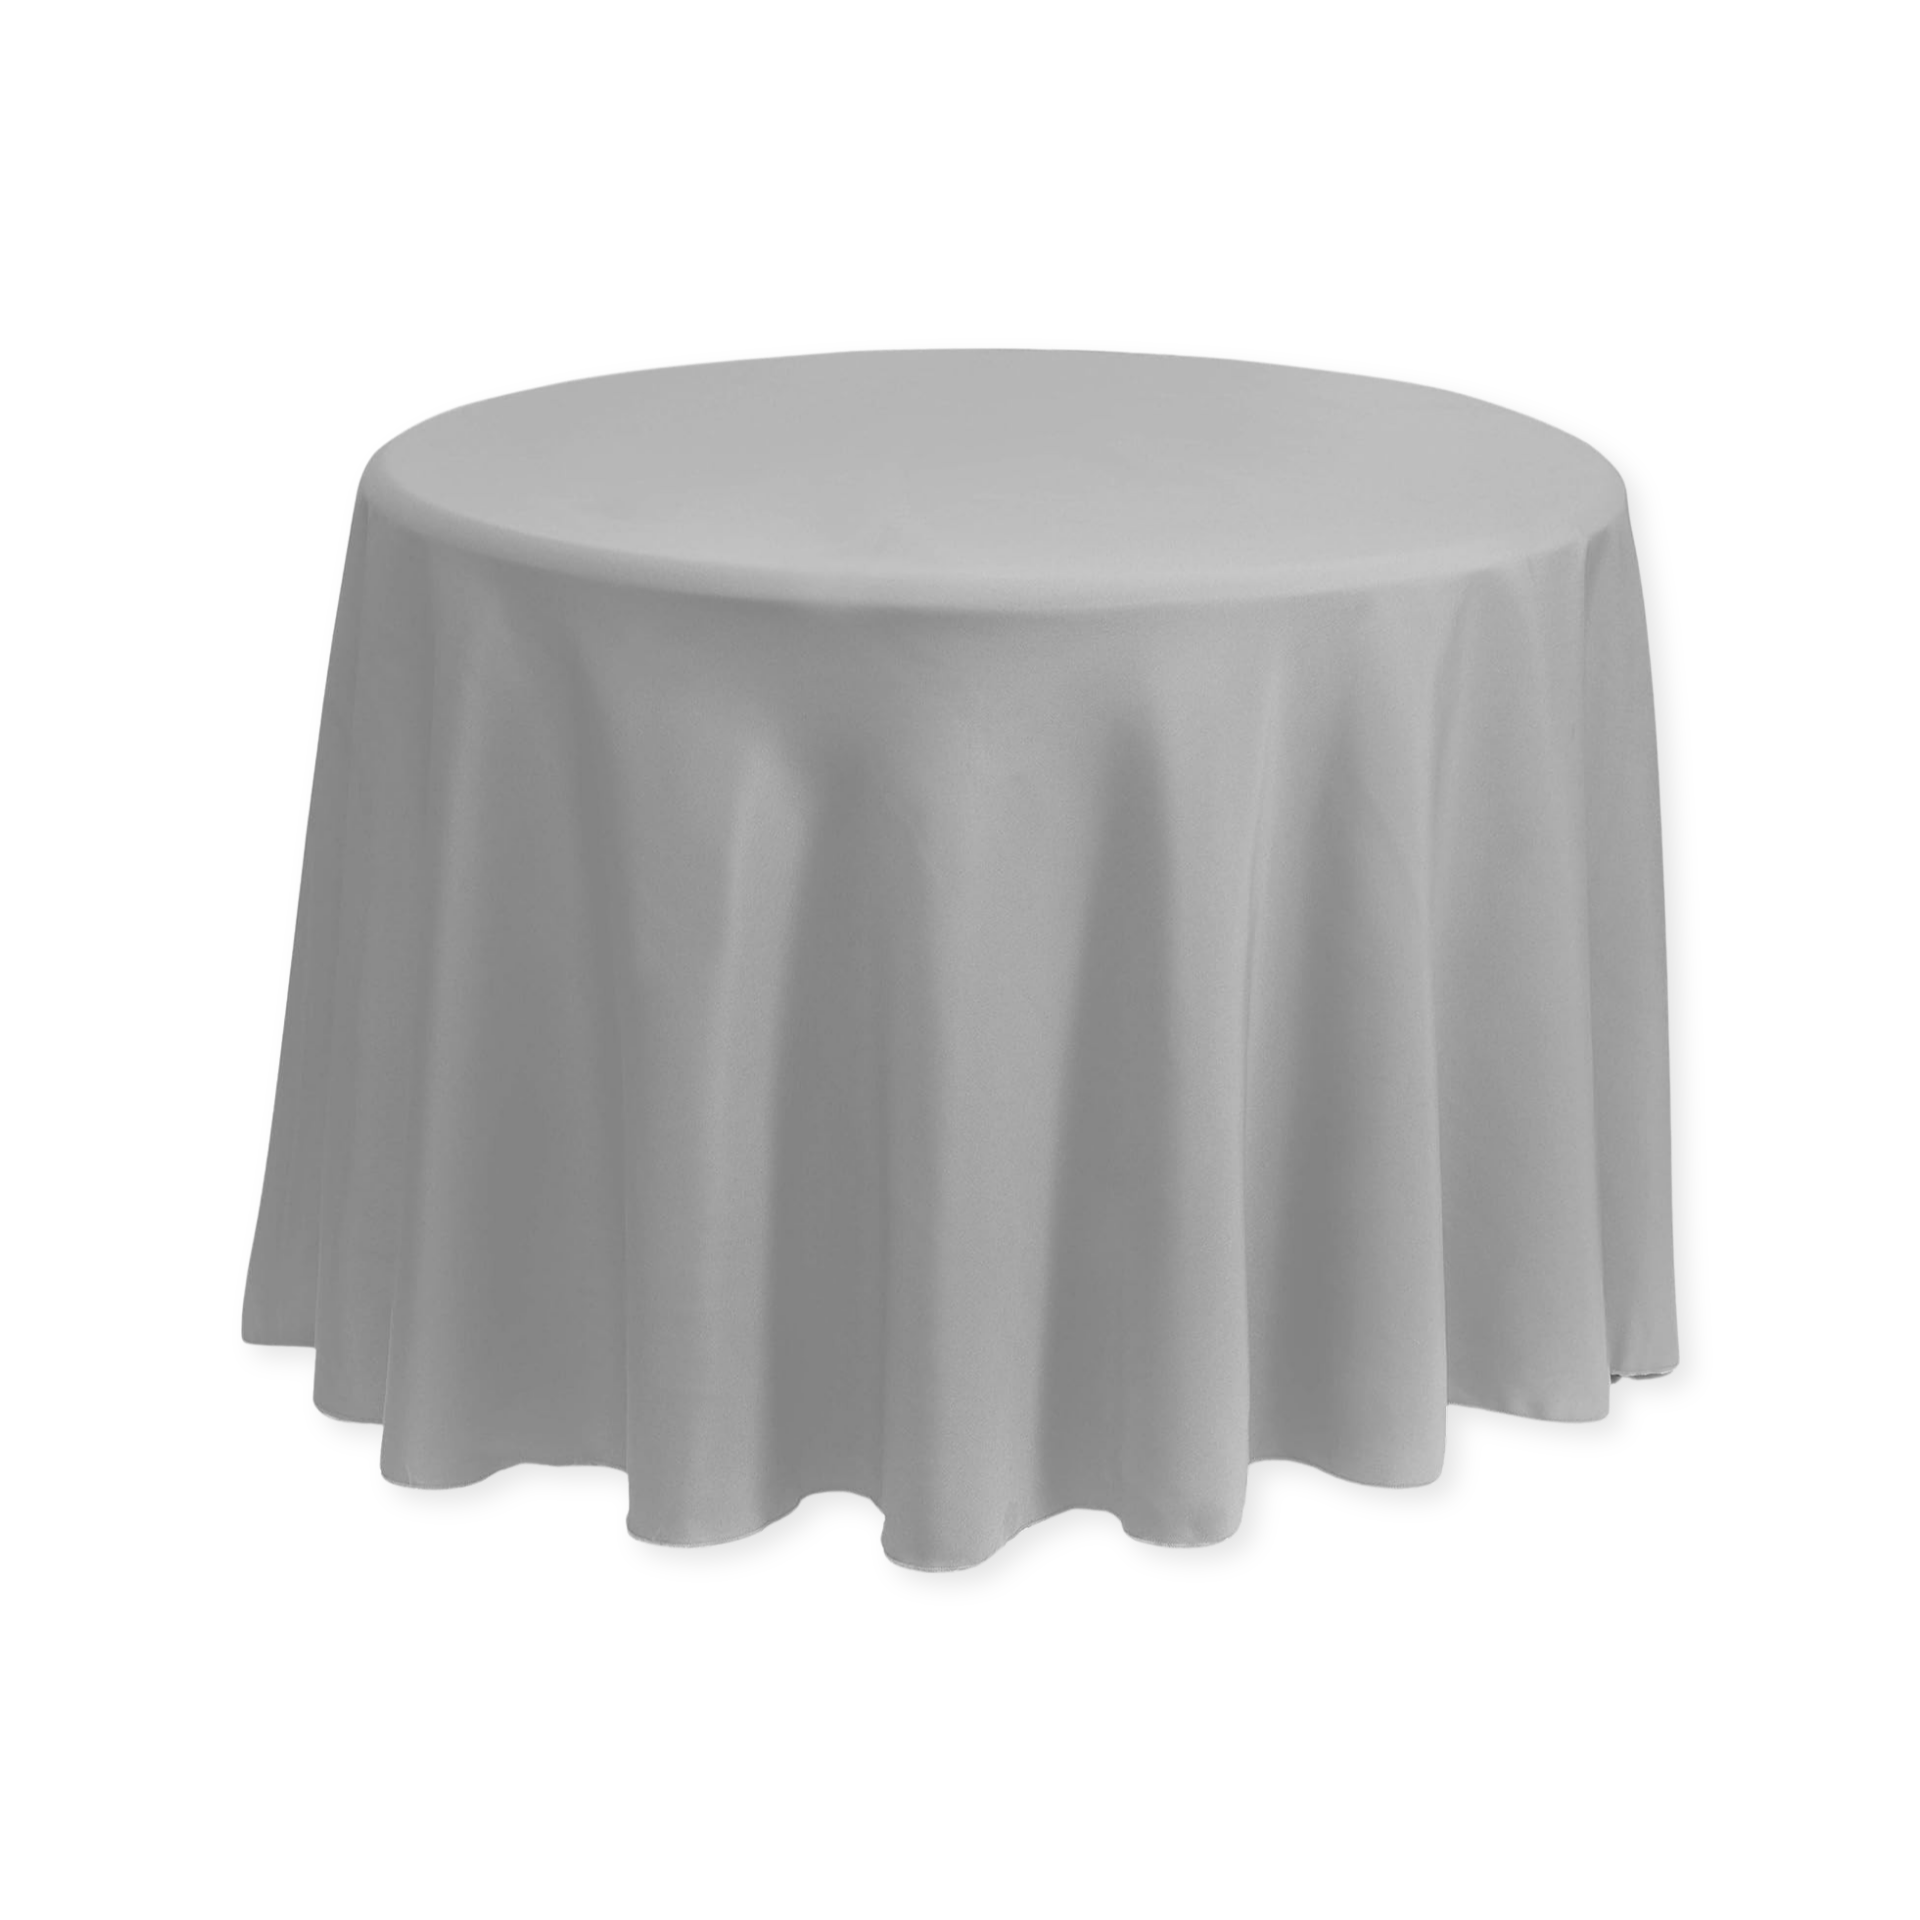 Tablecloth polyester round grey commercial grade wedding party event rental panama city beach